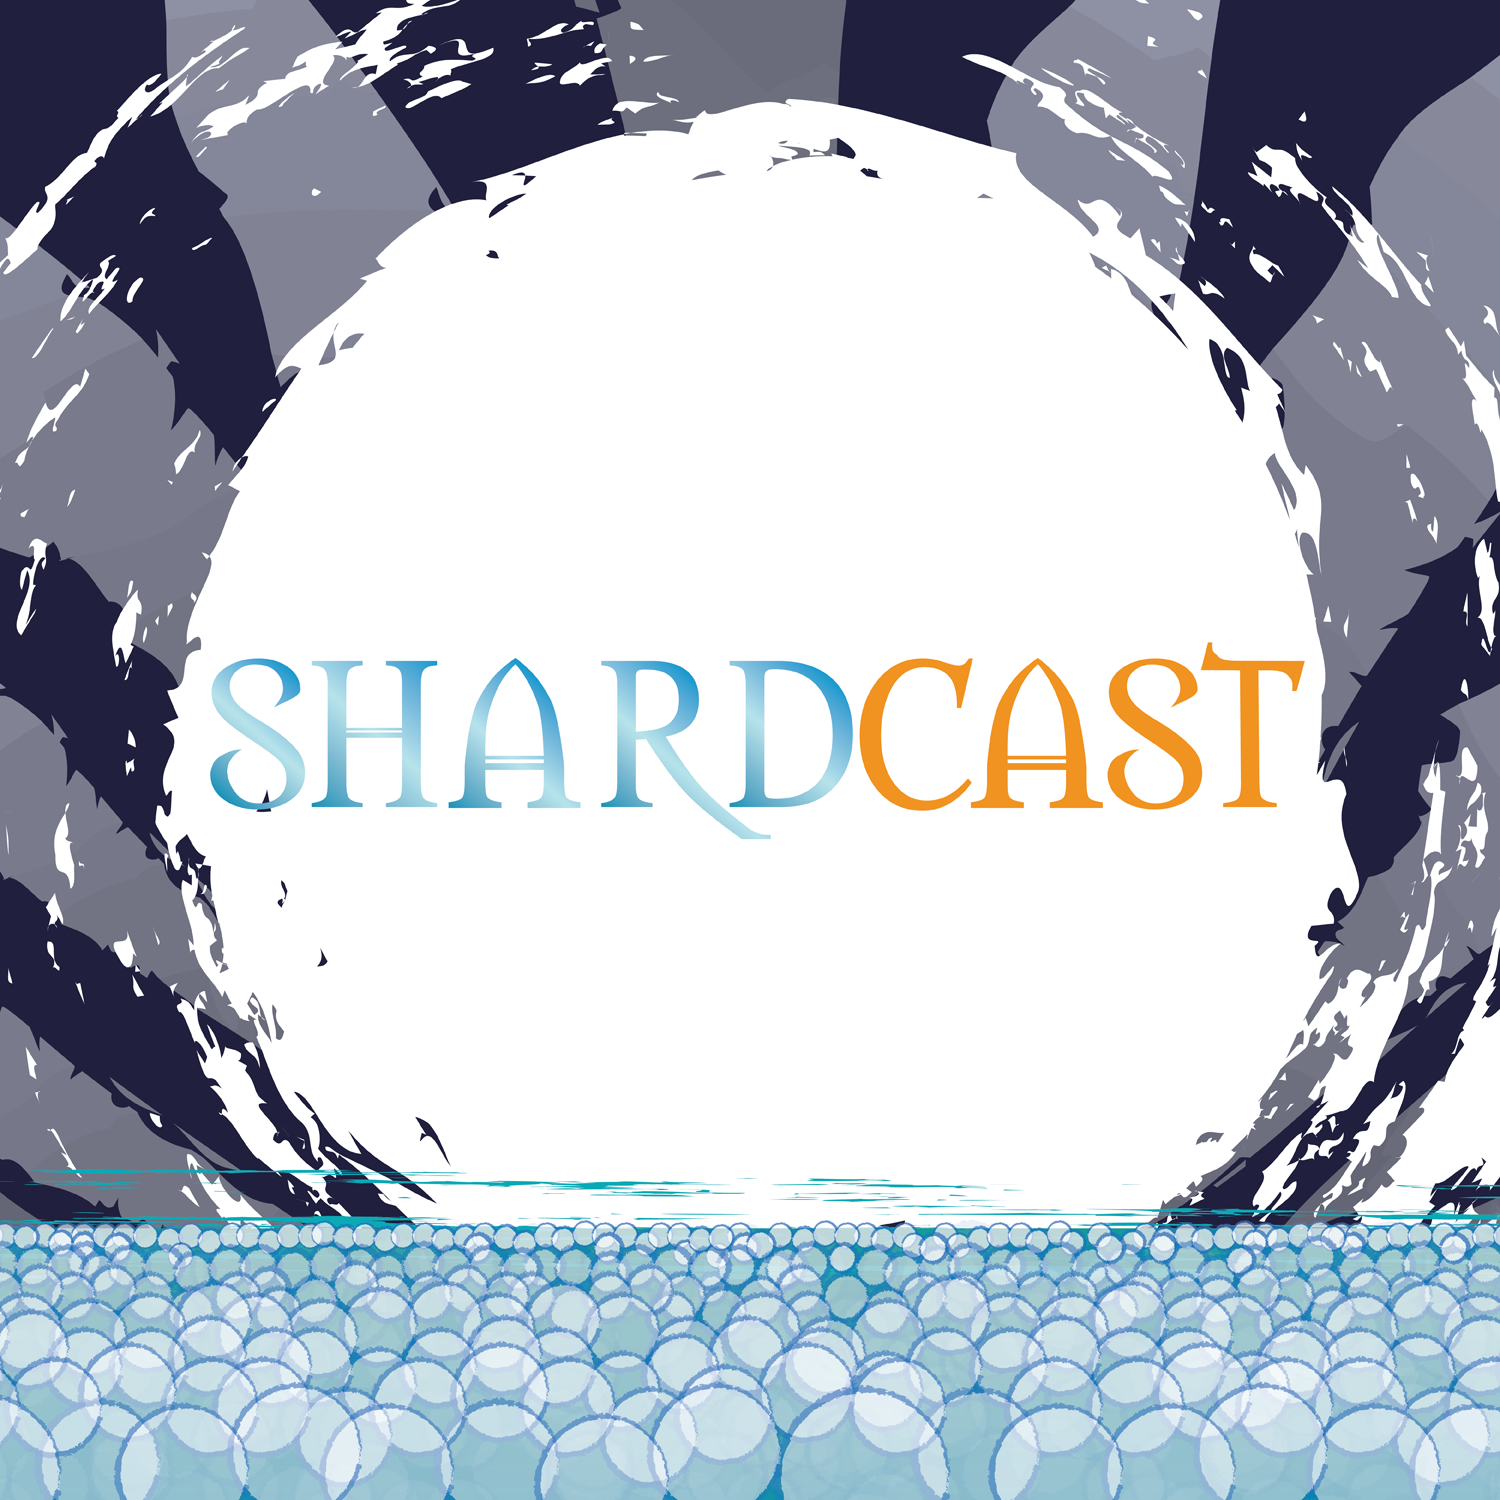 More information about "Shardcast ft. Brandon (Rhythm of War and Cosmere Spoilers)"